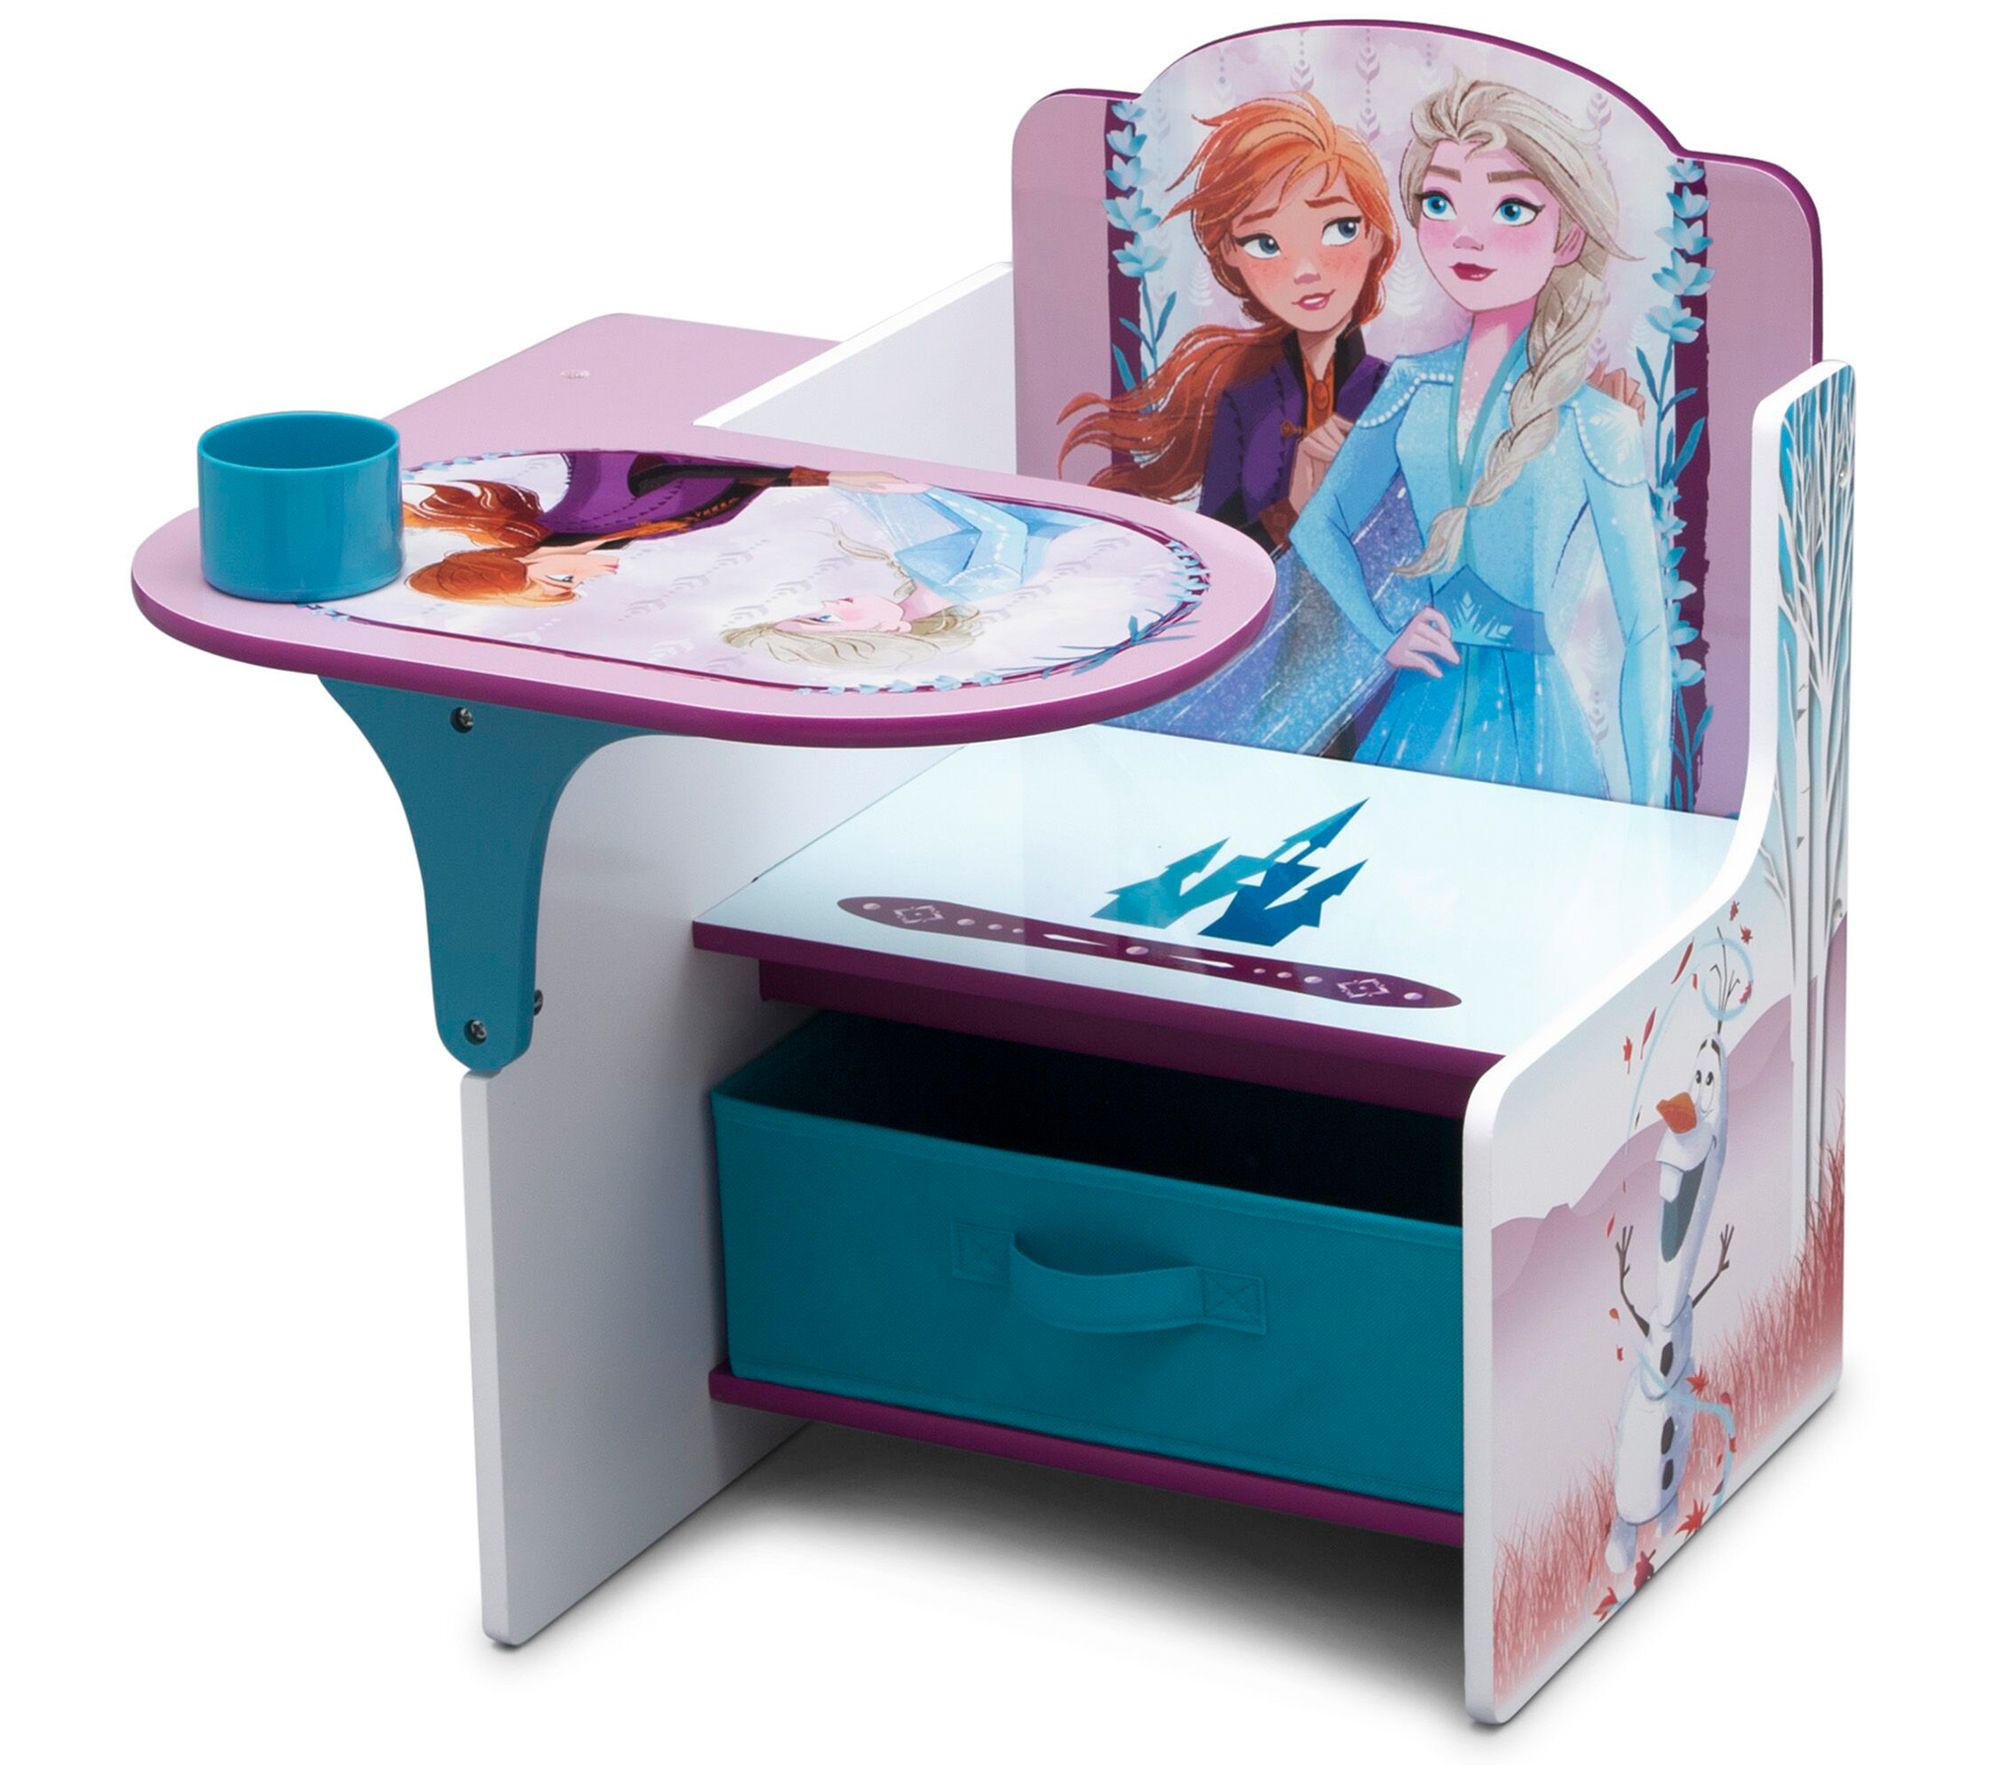 Disney Frozen Ii Chair Desk With, Minnie Mouse Chair Desk With Storage